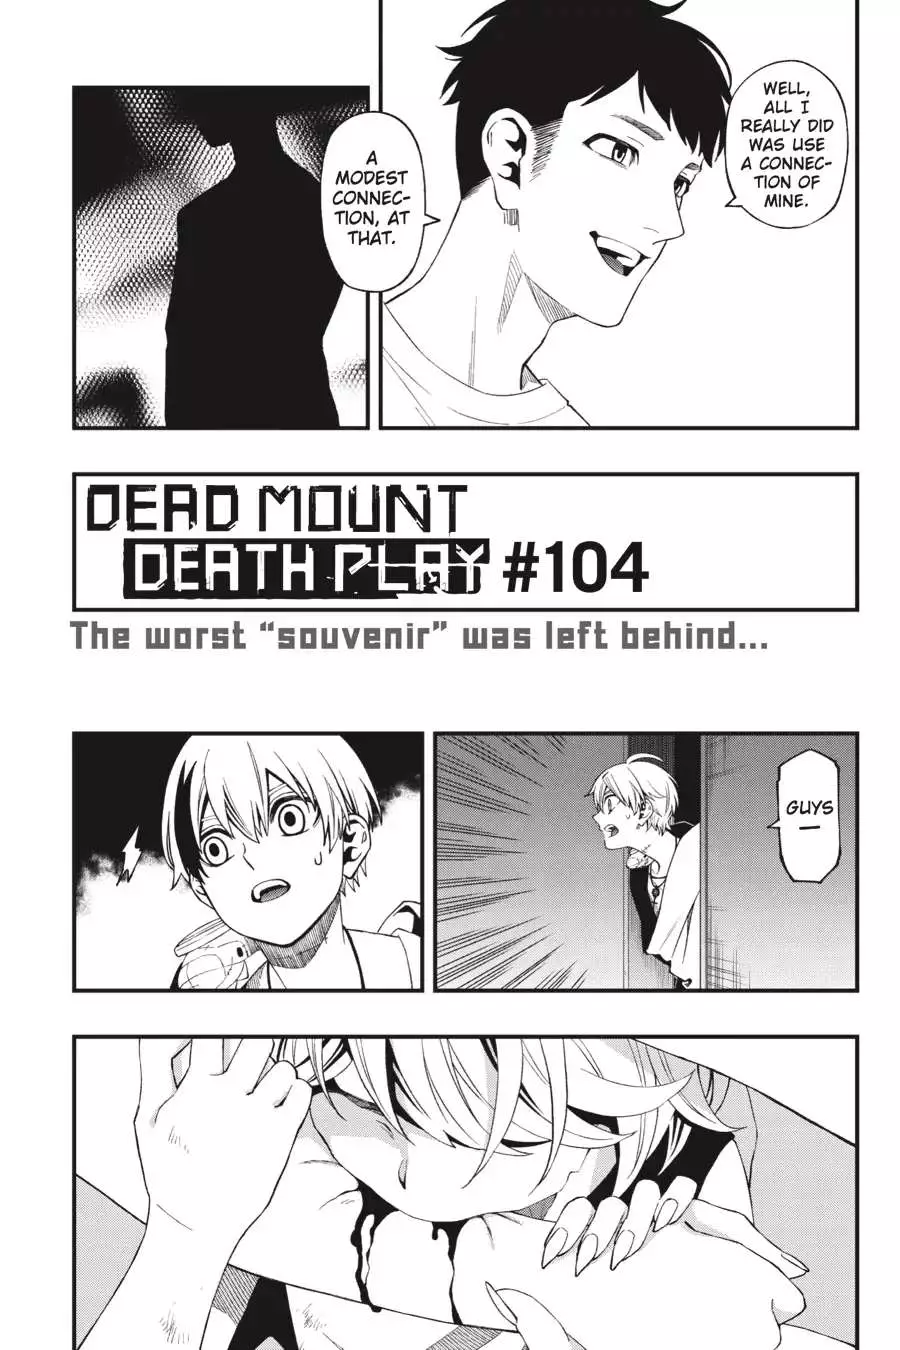 Dead Mount Death Play - 104 page 6-98d9a0f0